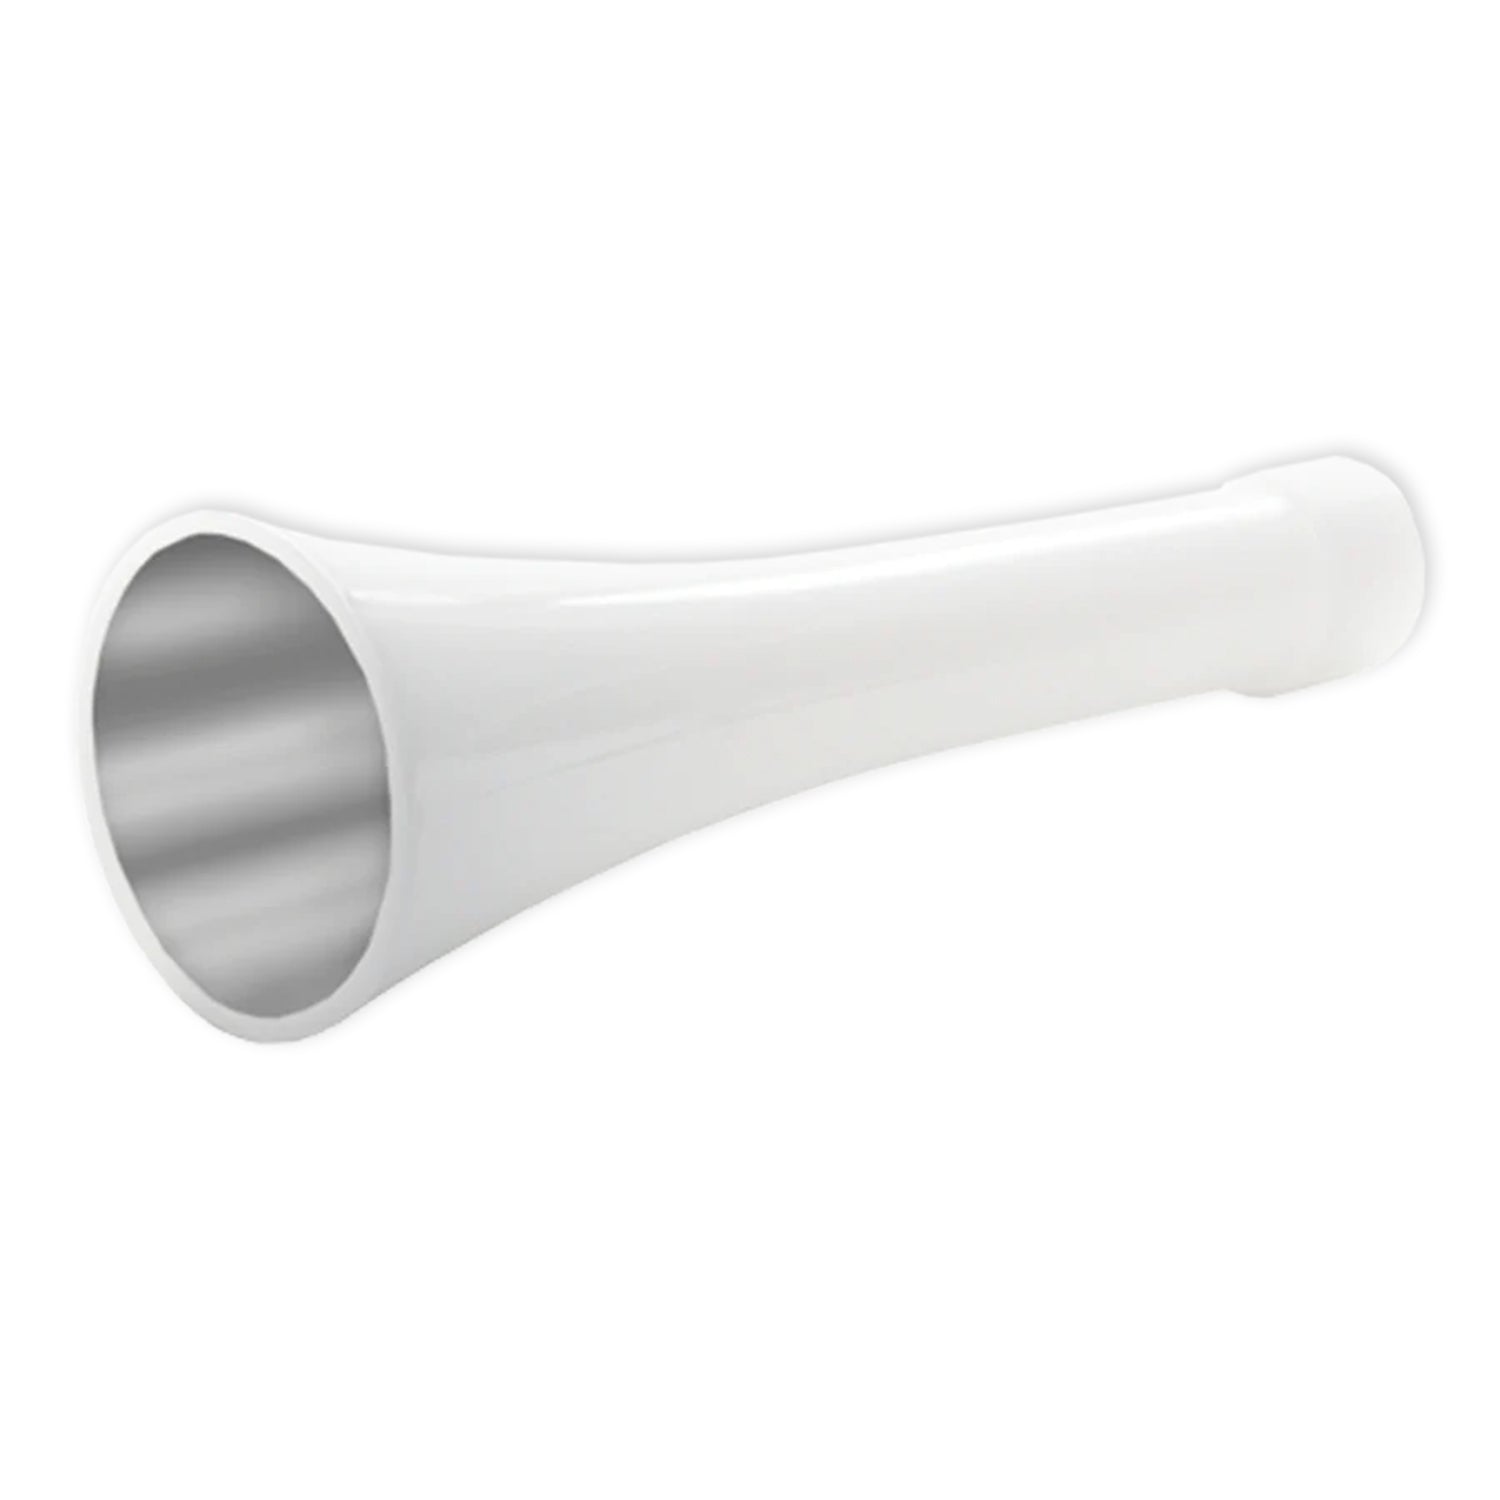 tornador-stainless-steel-rimmed-cone-ct-190